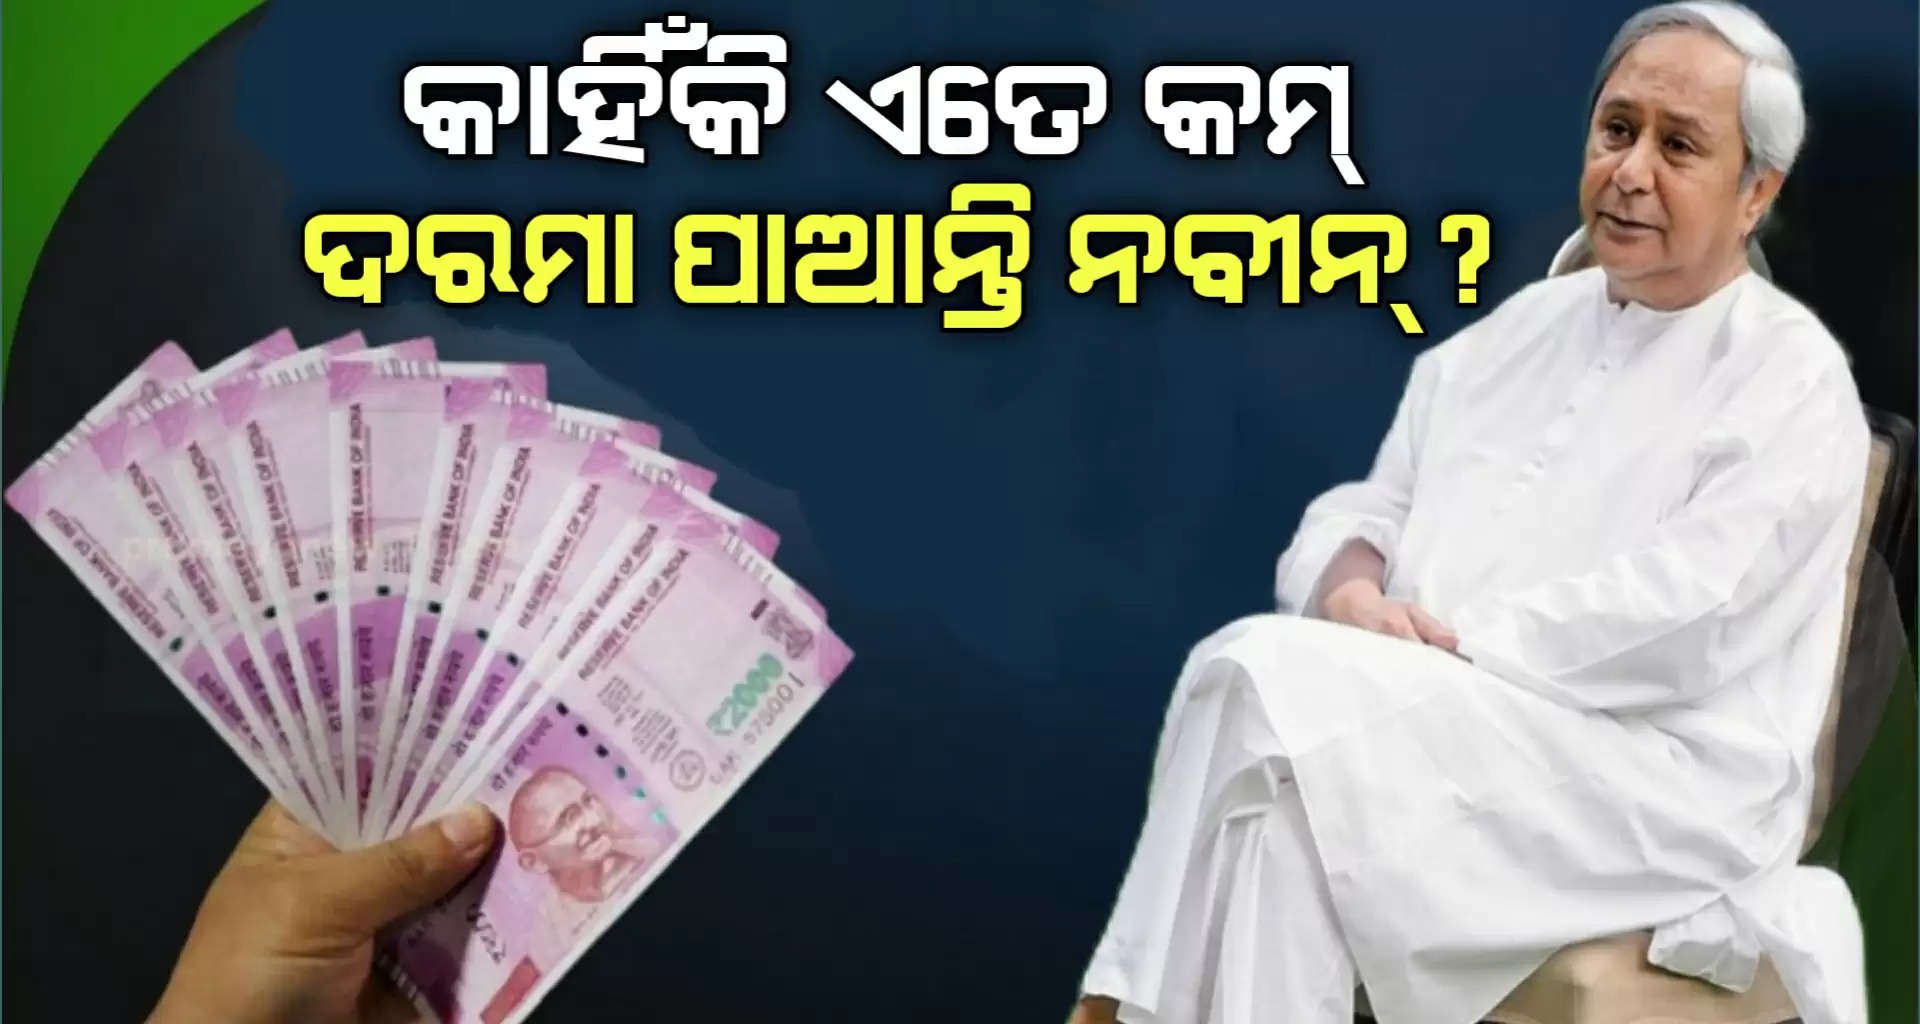 Chief minister salary